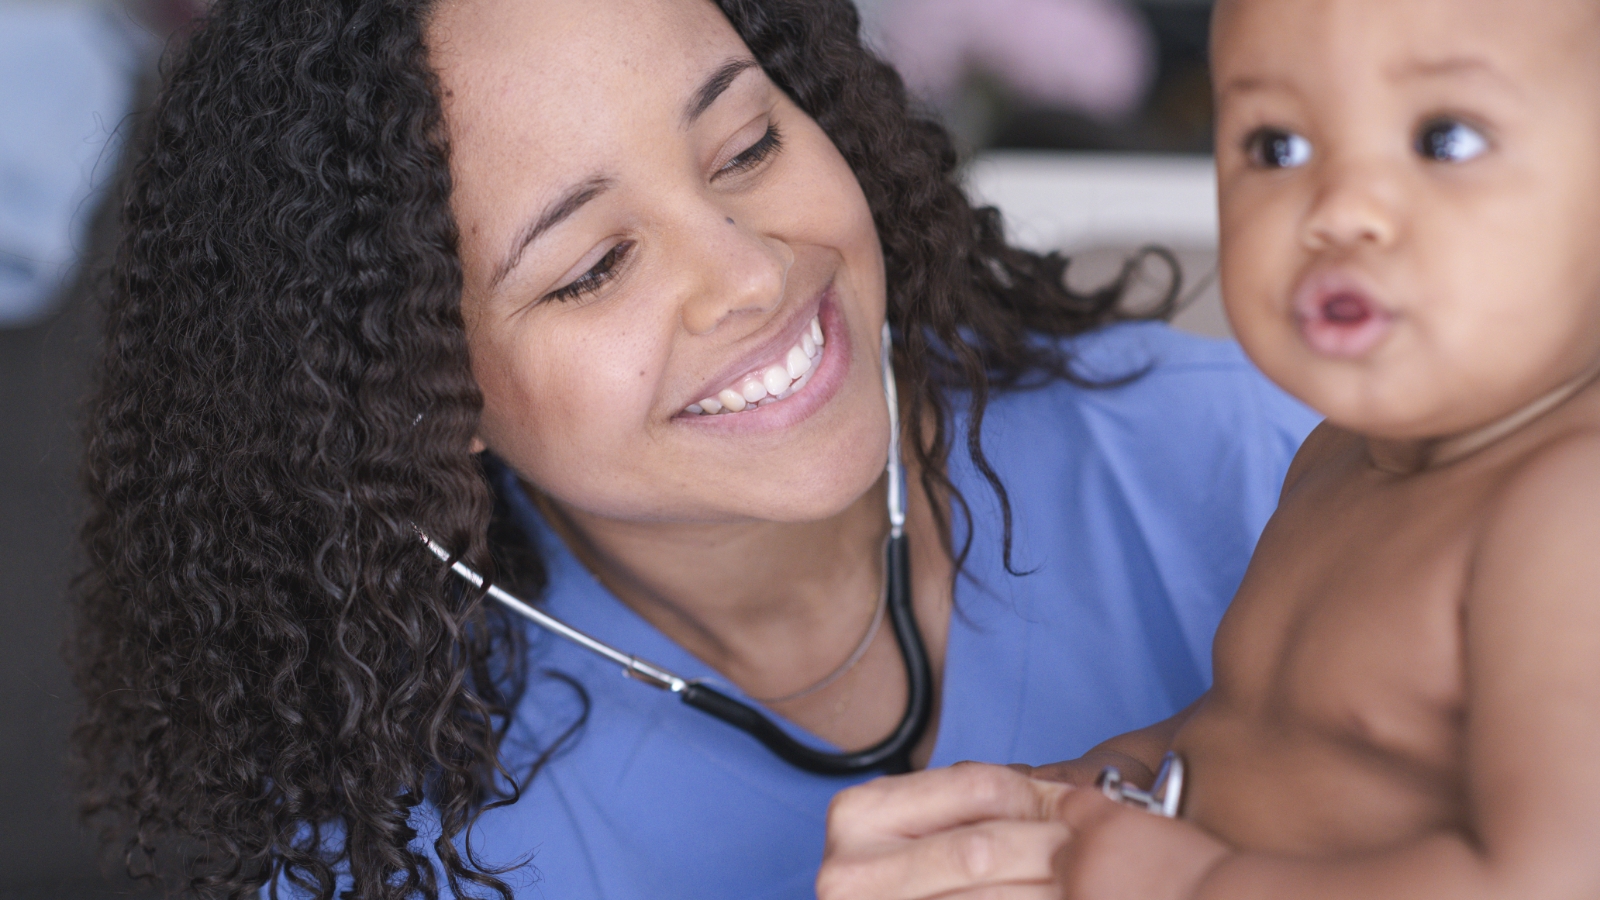 A nurse (left) is smiling at a baby (right)